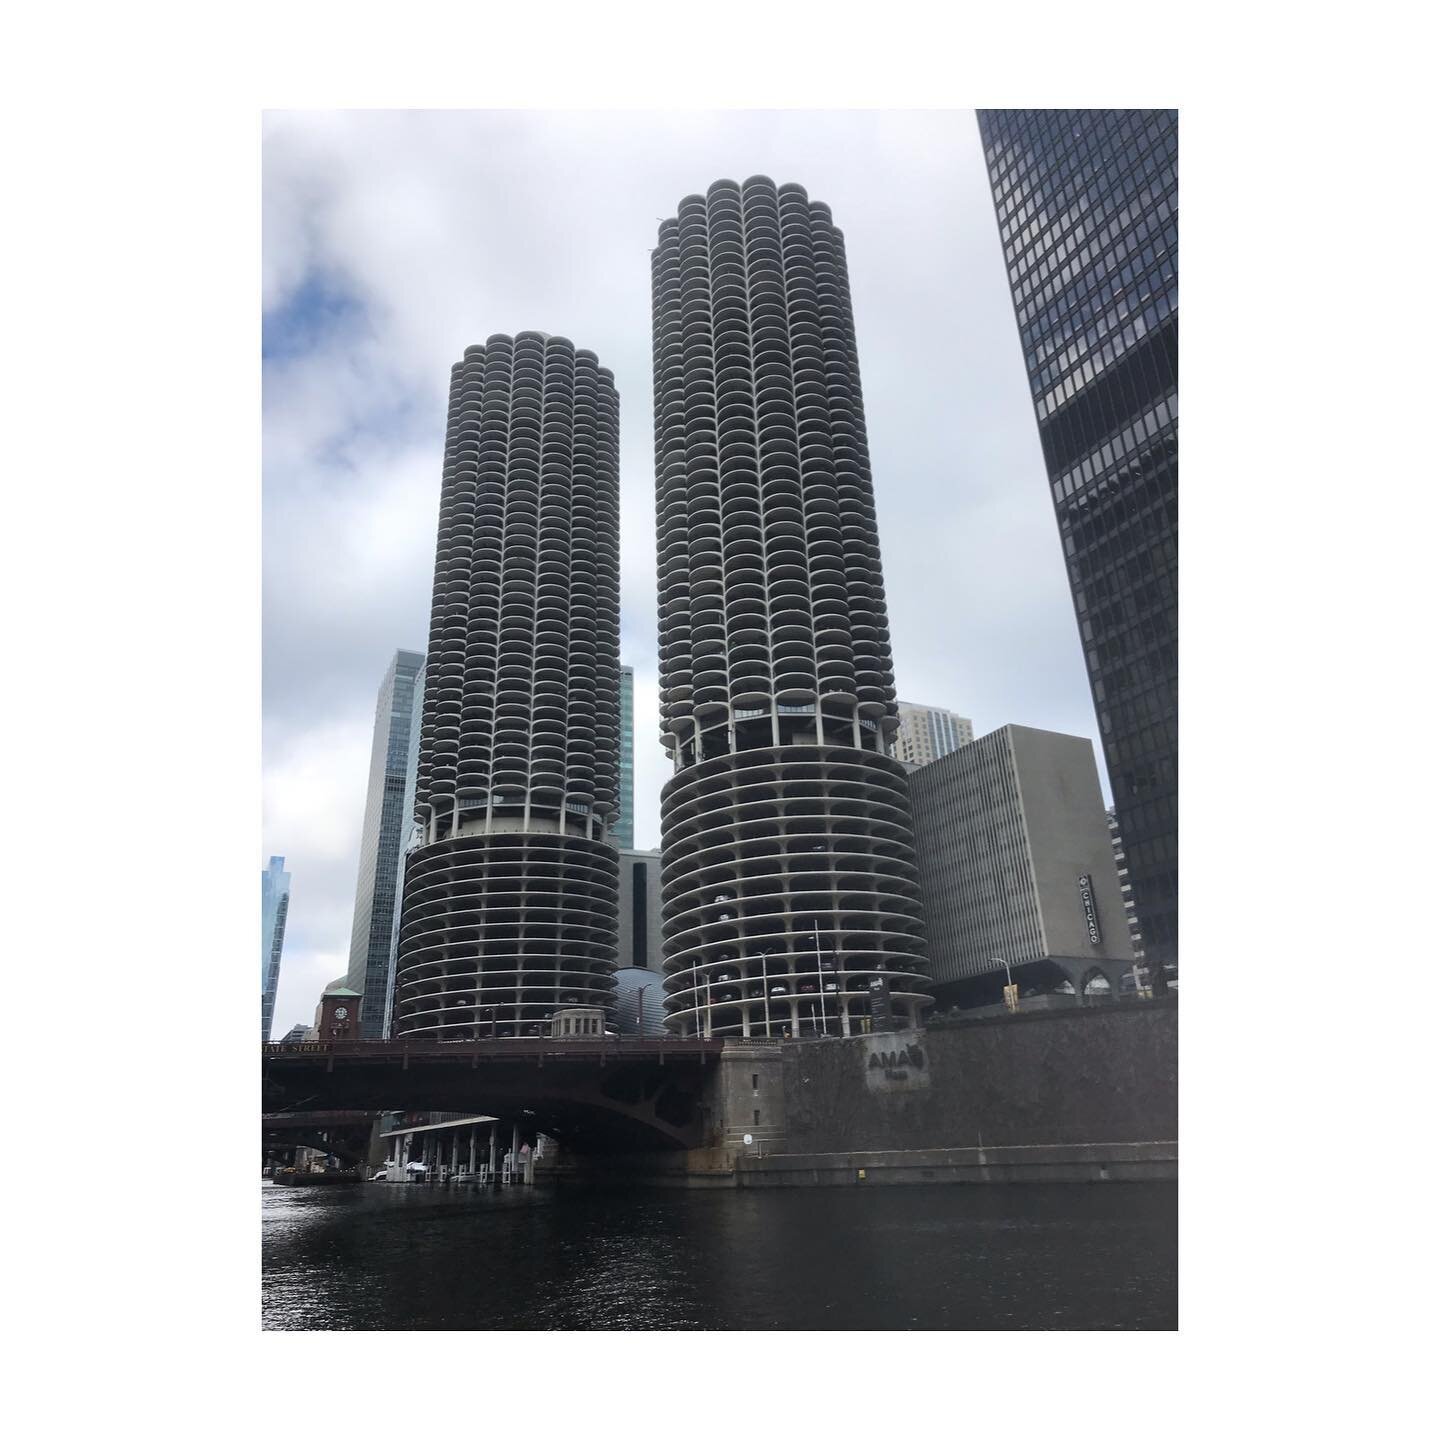 Back from a snowy week in the Windy City. Lots of inspiration including these Bertrand Goldberg towers ❄️ Time to hit the drawing board! 

#chicago #bertrandgoldbergassociates #architecture